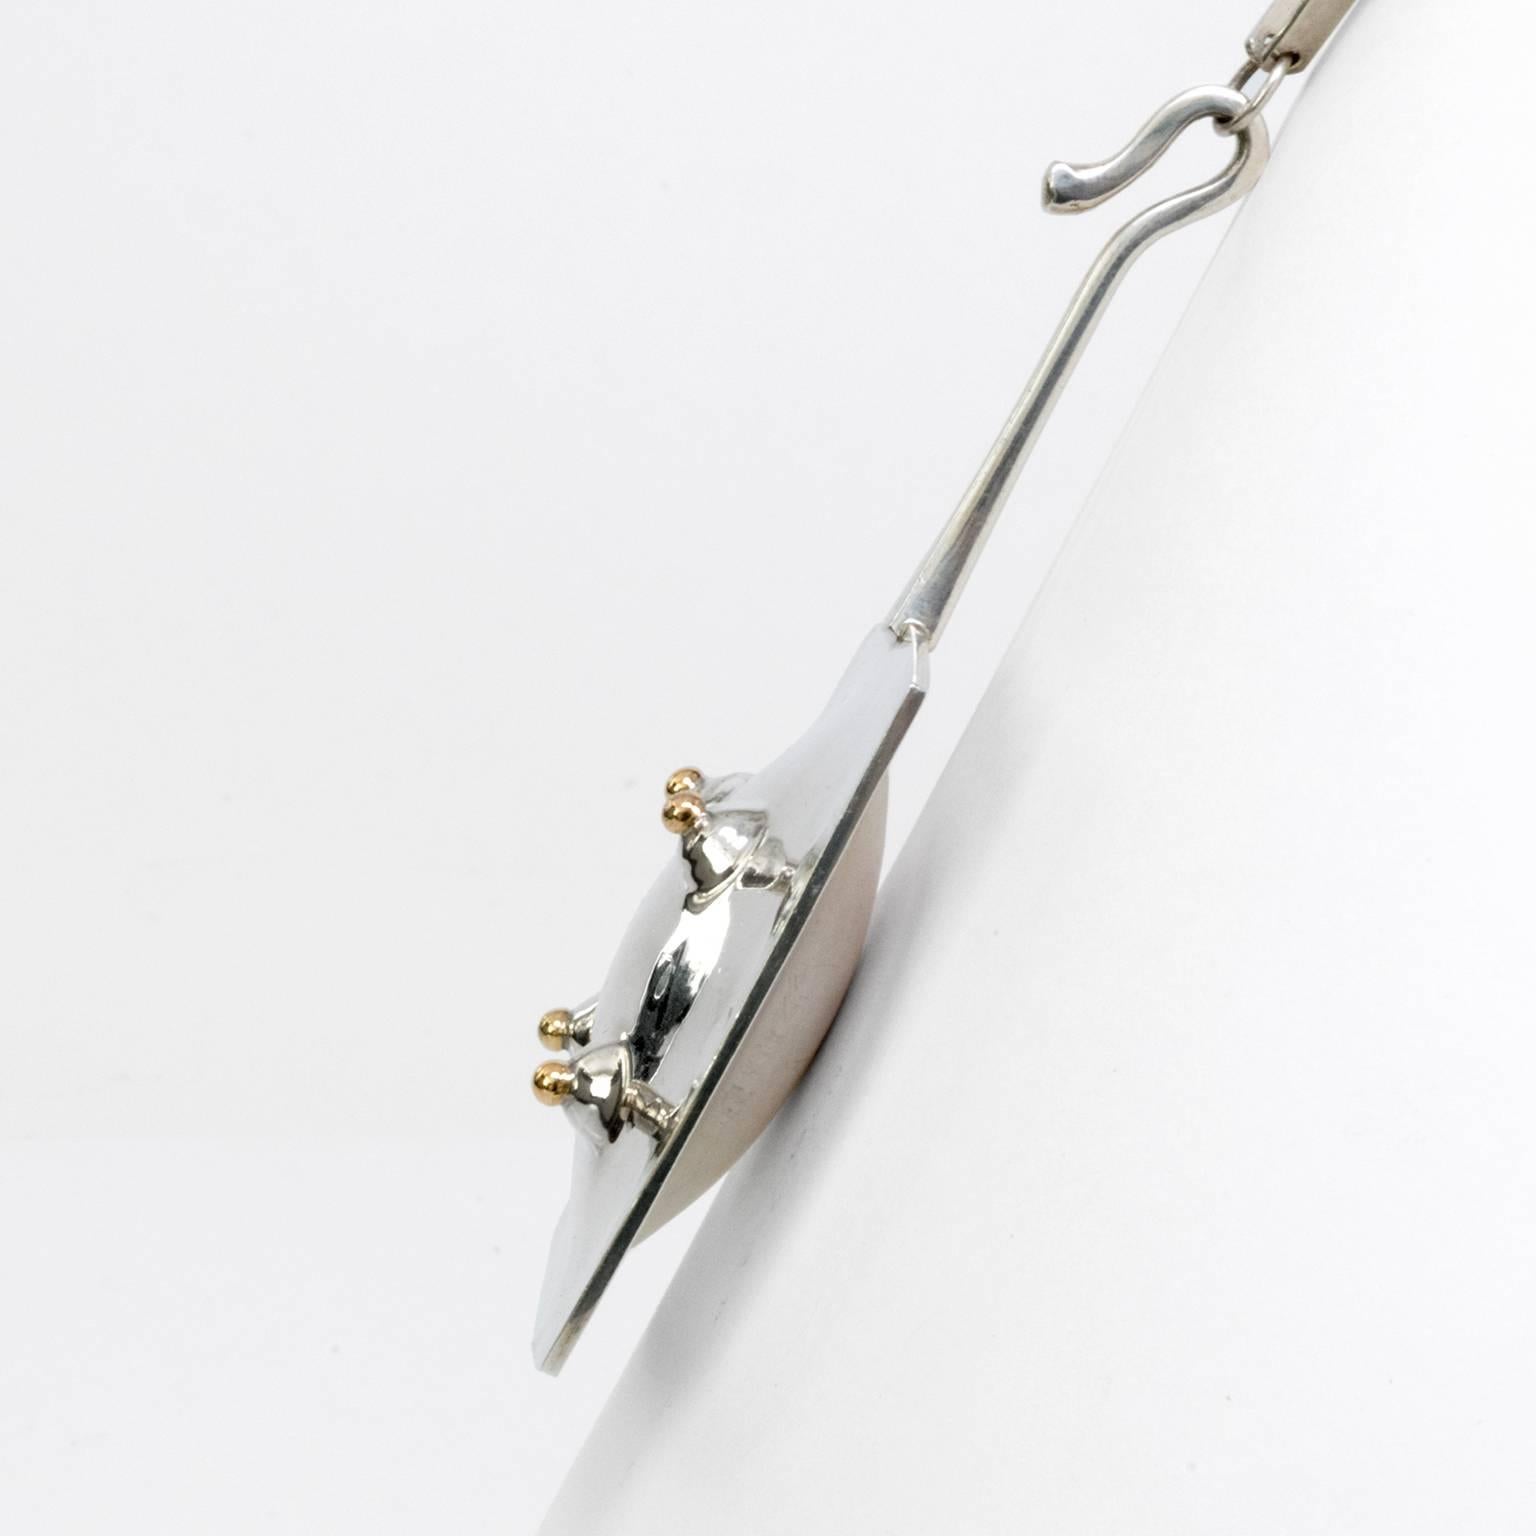 Scandinavian Modern Sterling Silver Pendant with Chain by Ove Bohlin, 1972 In Excellent Condition For Sale In New York, NY